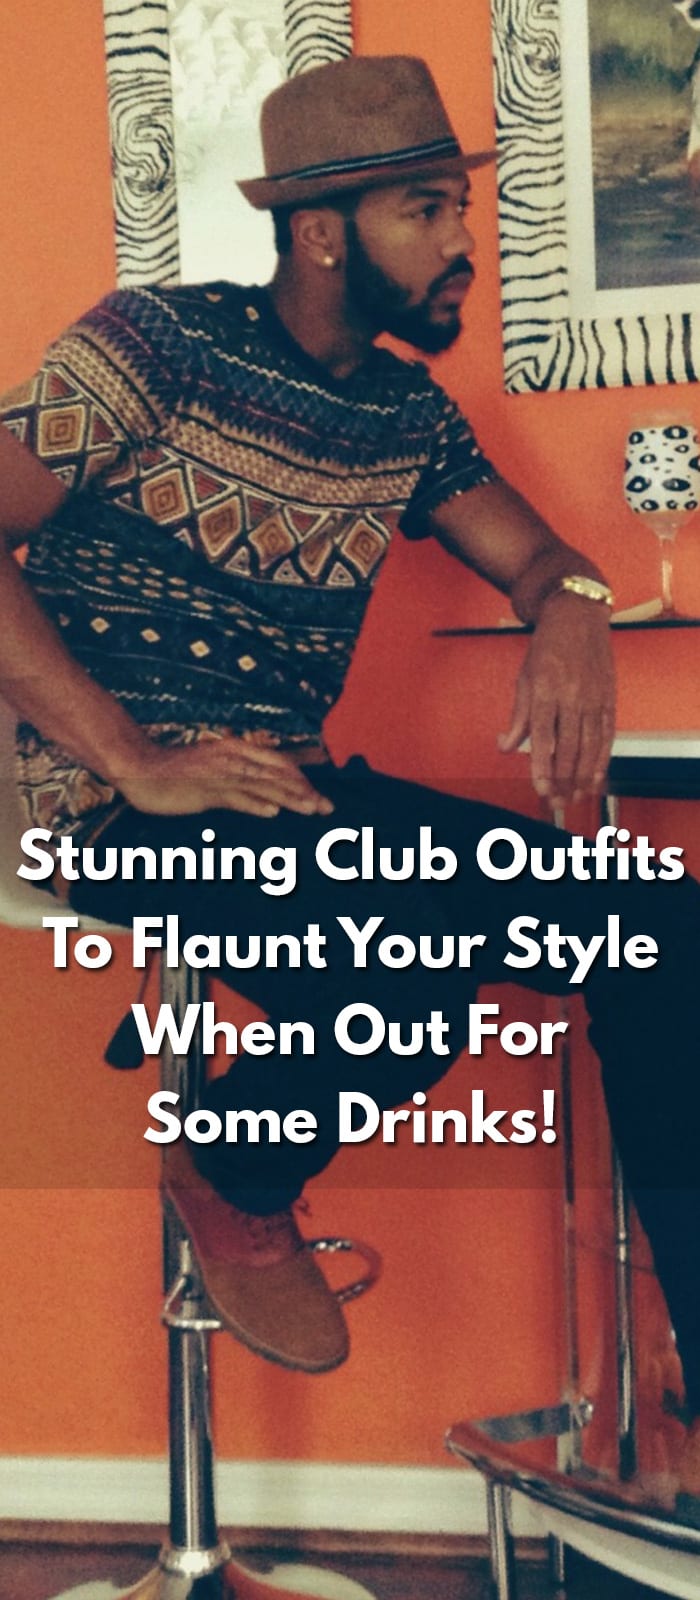 Stunning-Club-Outfits-To-Flaunt-Your-Style-When-Out-For-Some-Drinks!